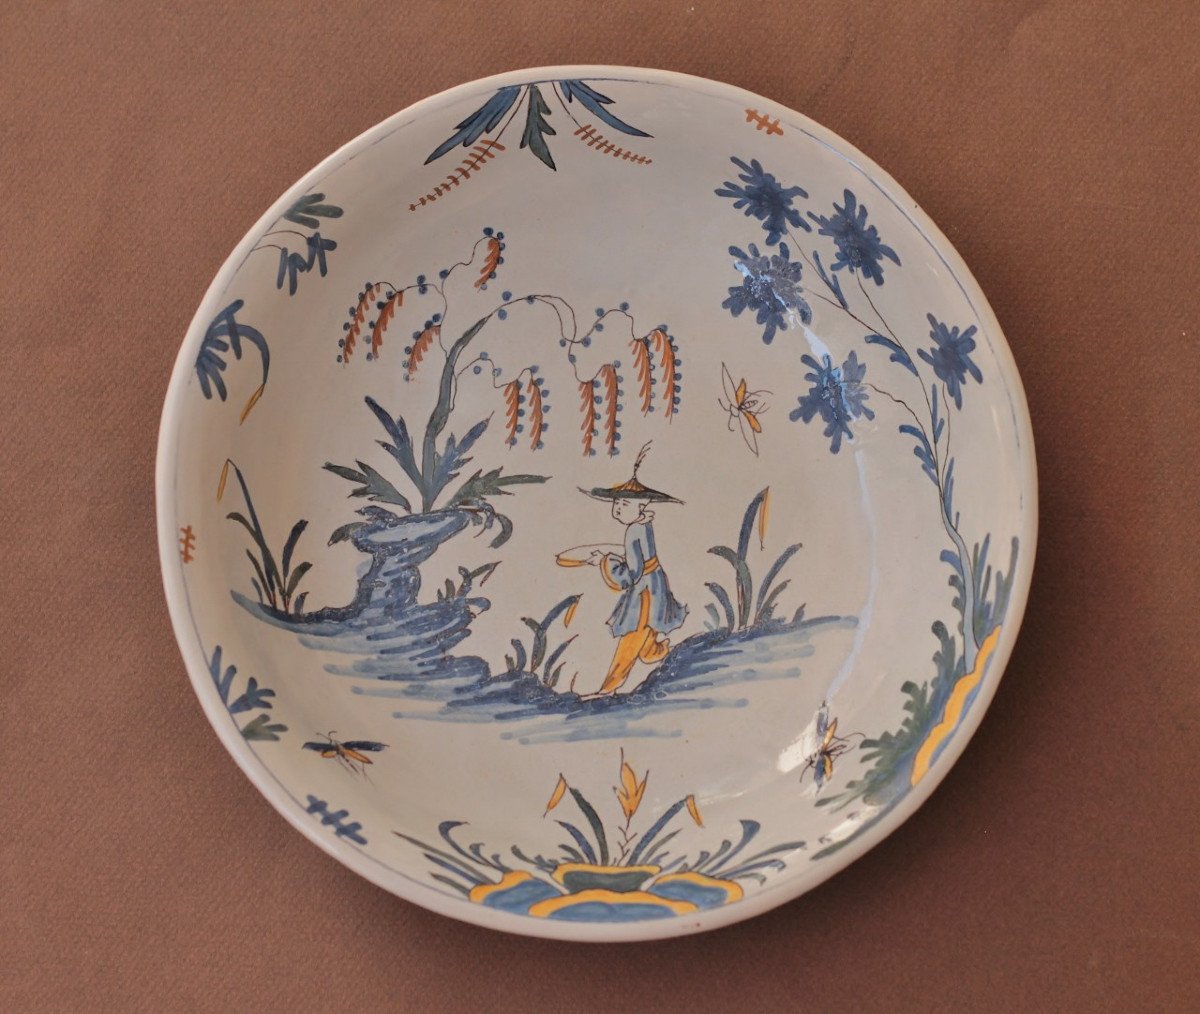 Moulins Bowl In Faience Depecting A Chinese With Tree, Insects And Foliage. 18th Century.